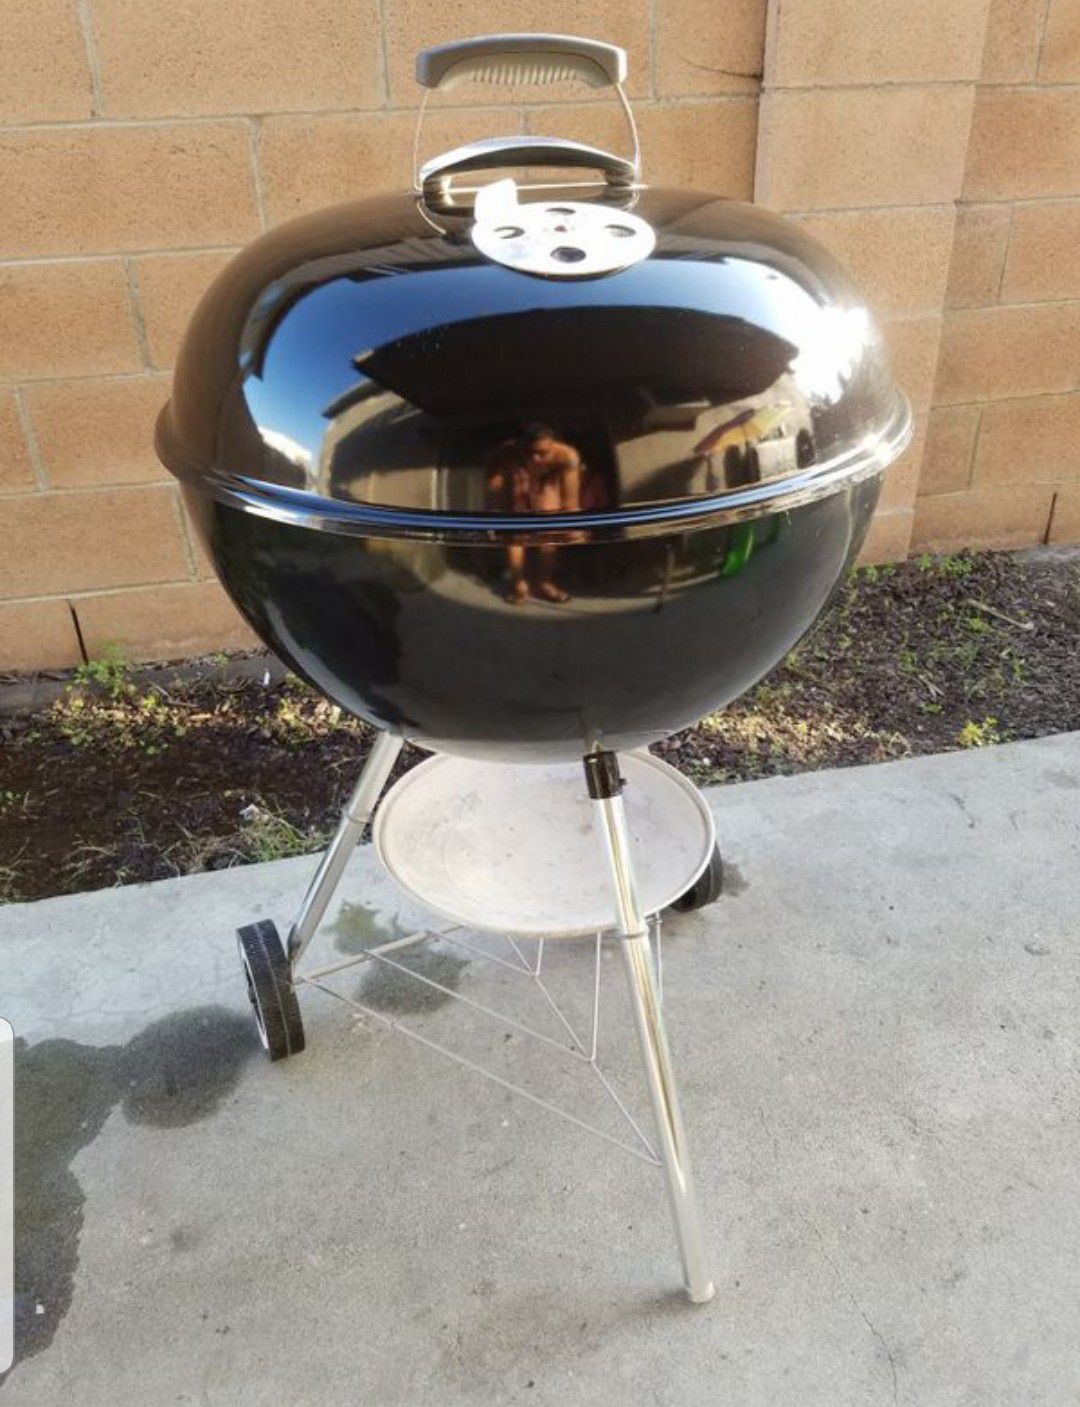 In excellent condition Weber bbq grill